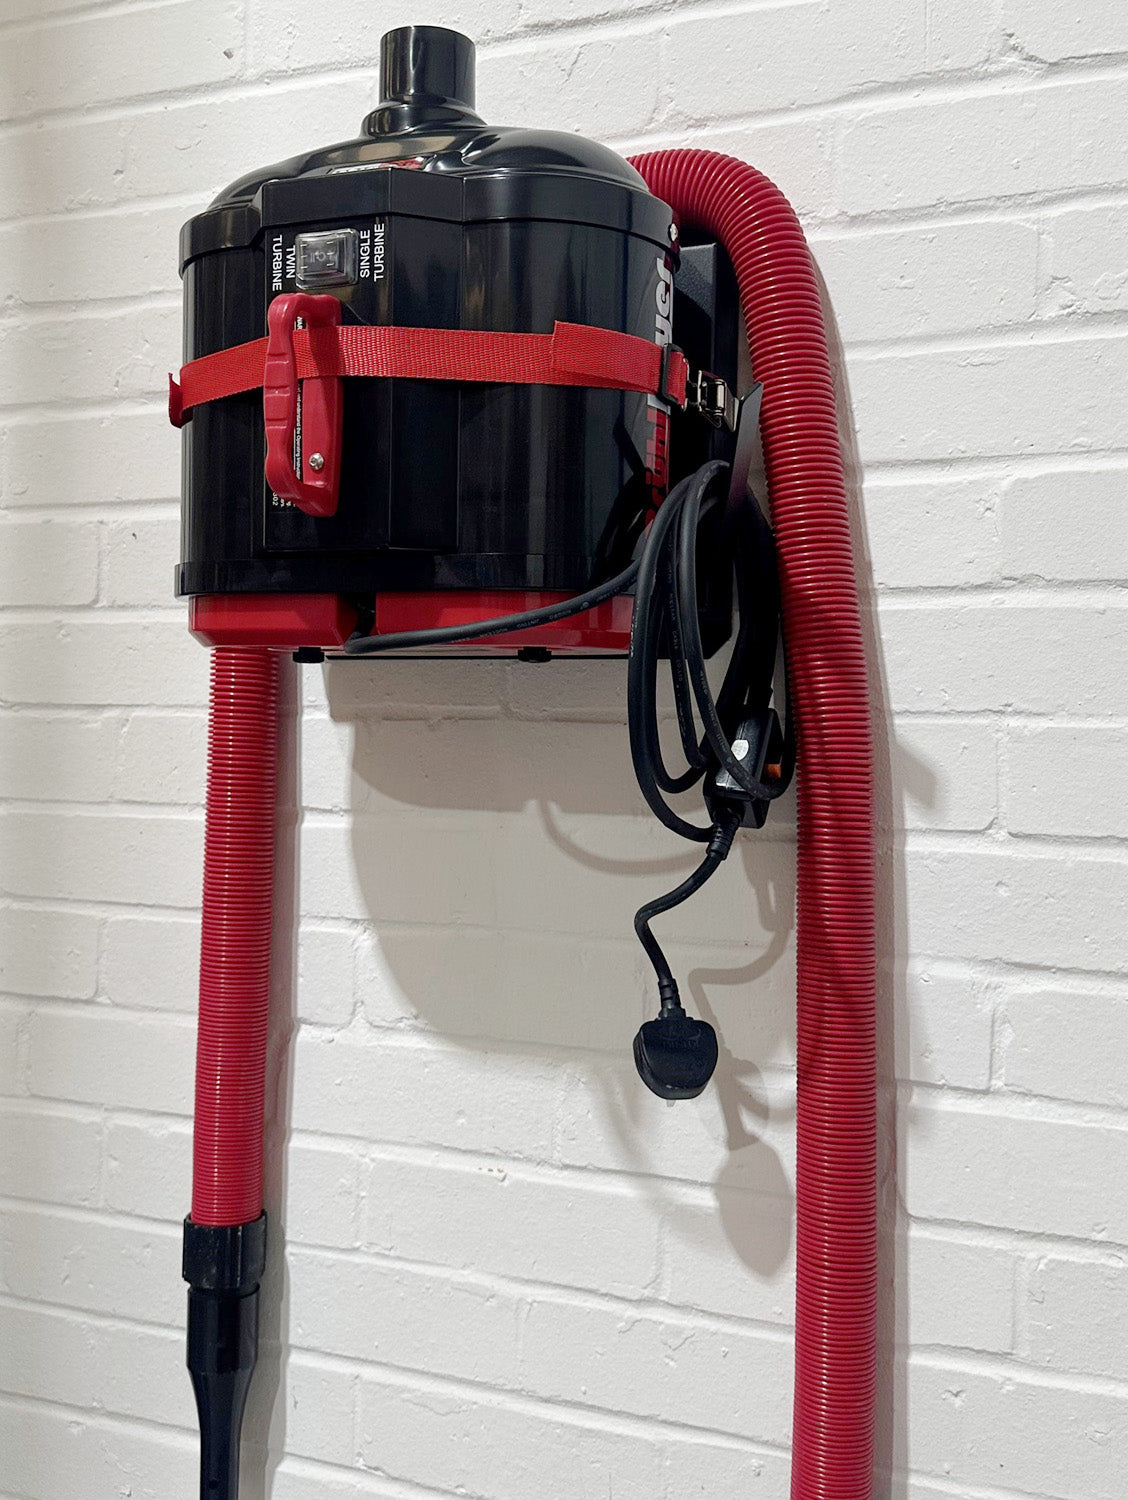 Bruhl Wall Hanger - for the MD2800PRO Dryer